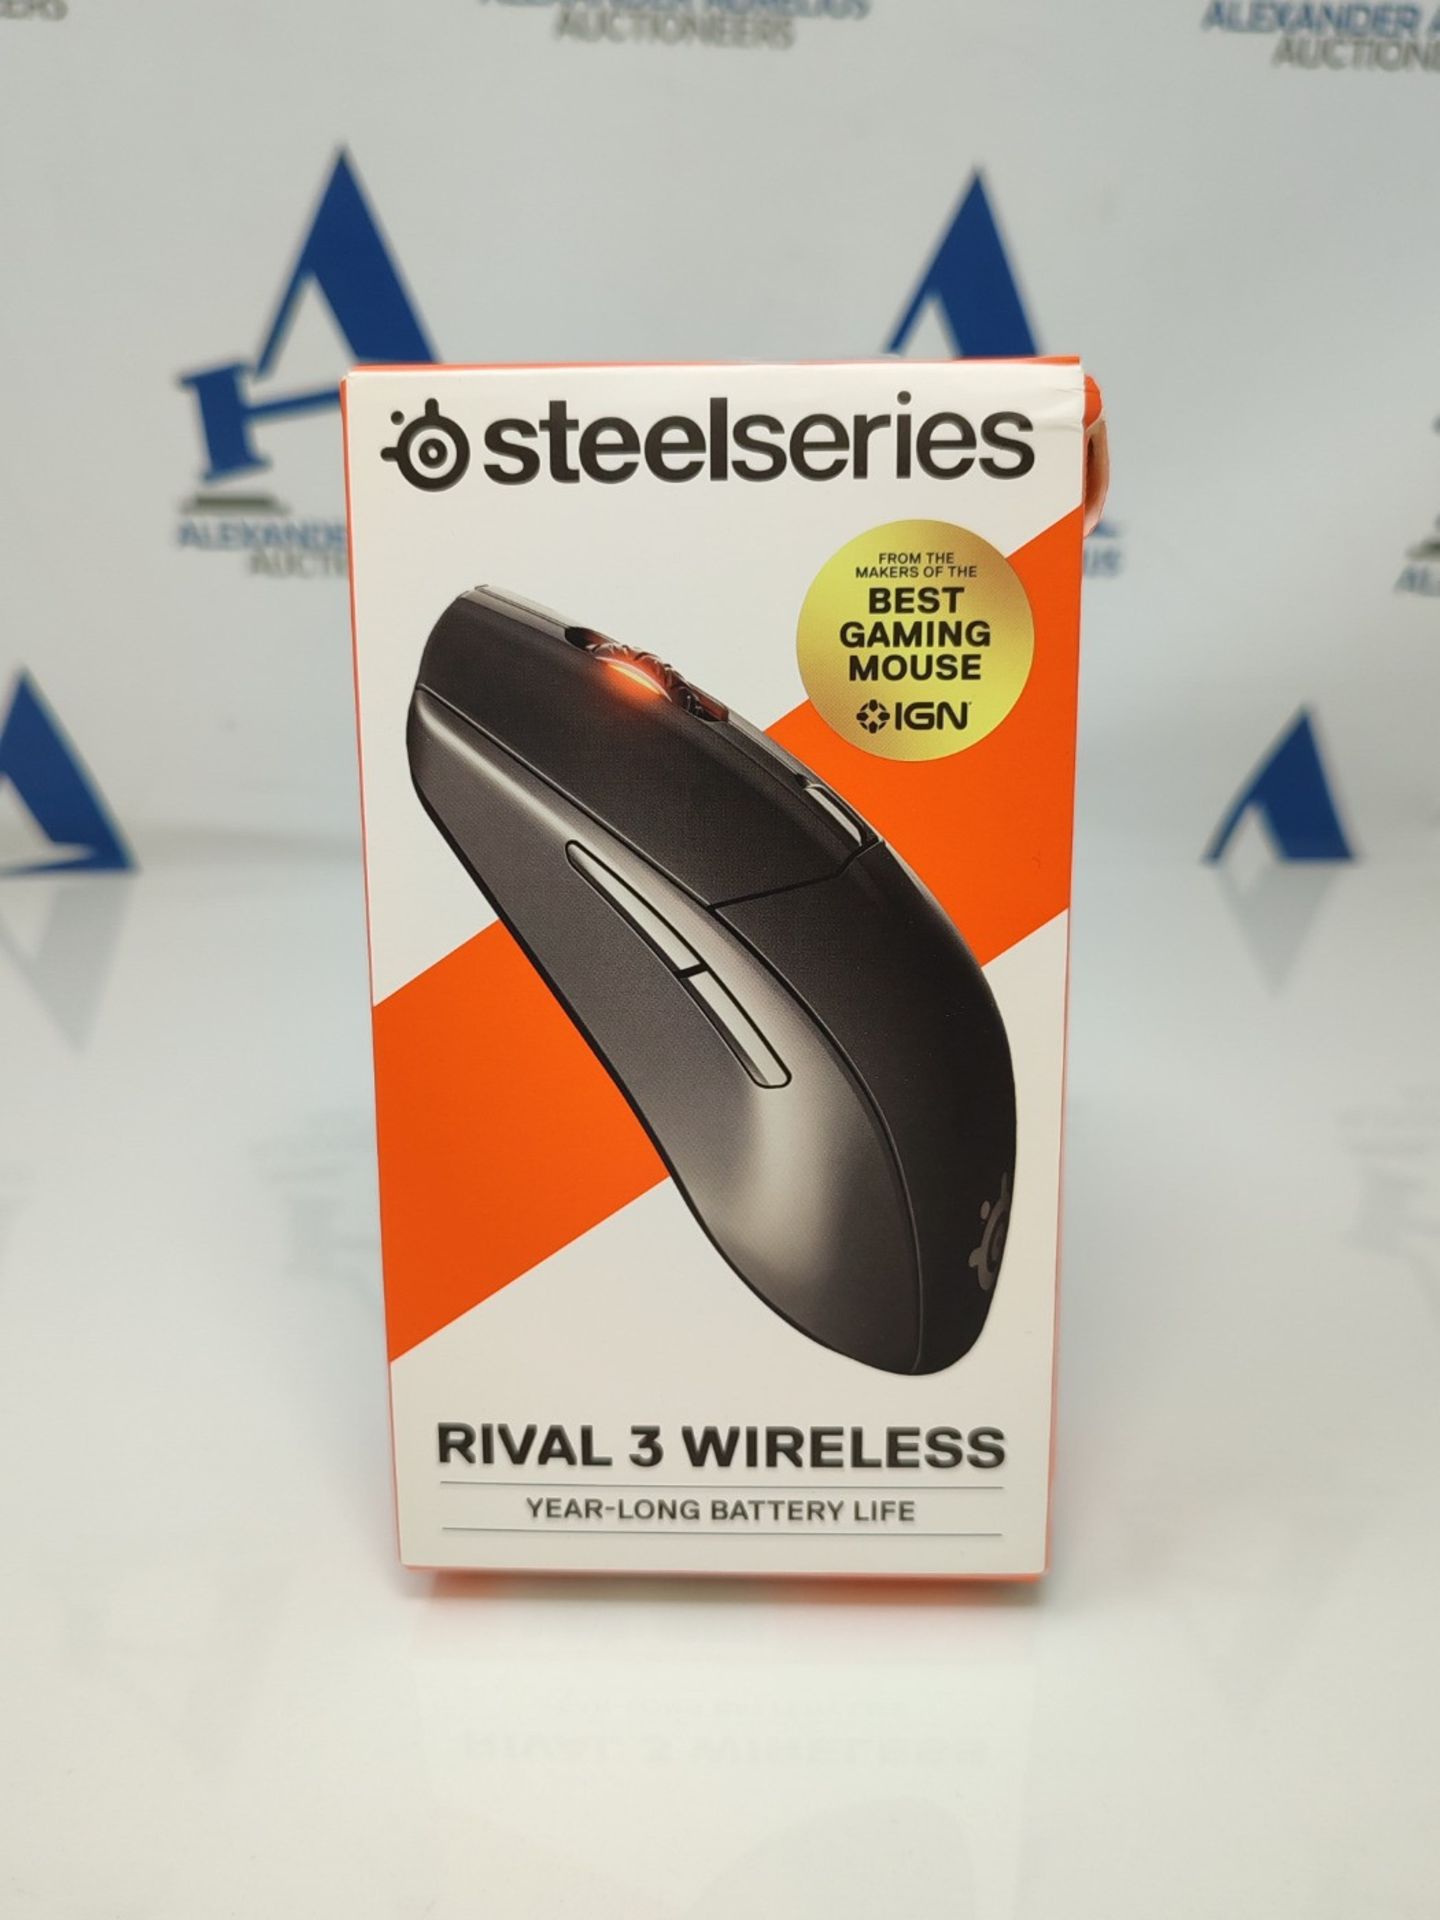 SteelSeries Rival 3 wireless gaming mouse - 400+ hours of battery life - Dual Wireless - Image 2 of 3